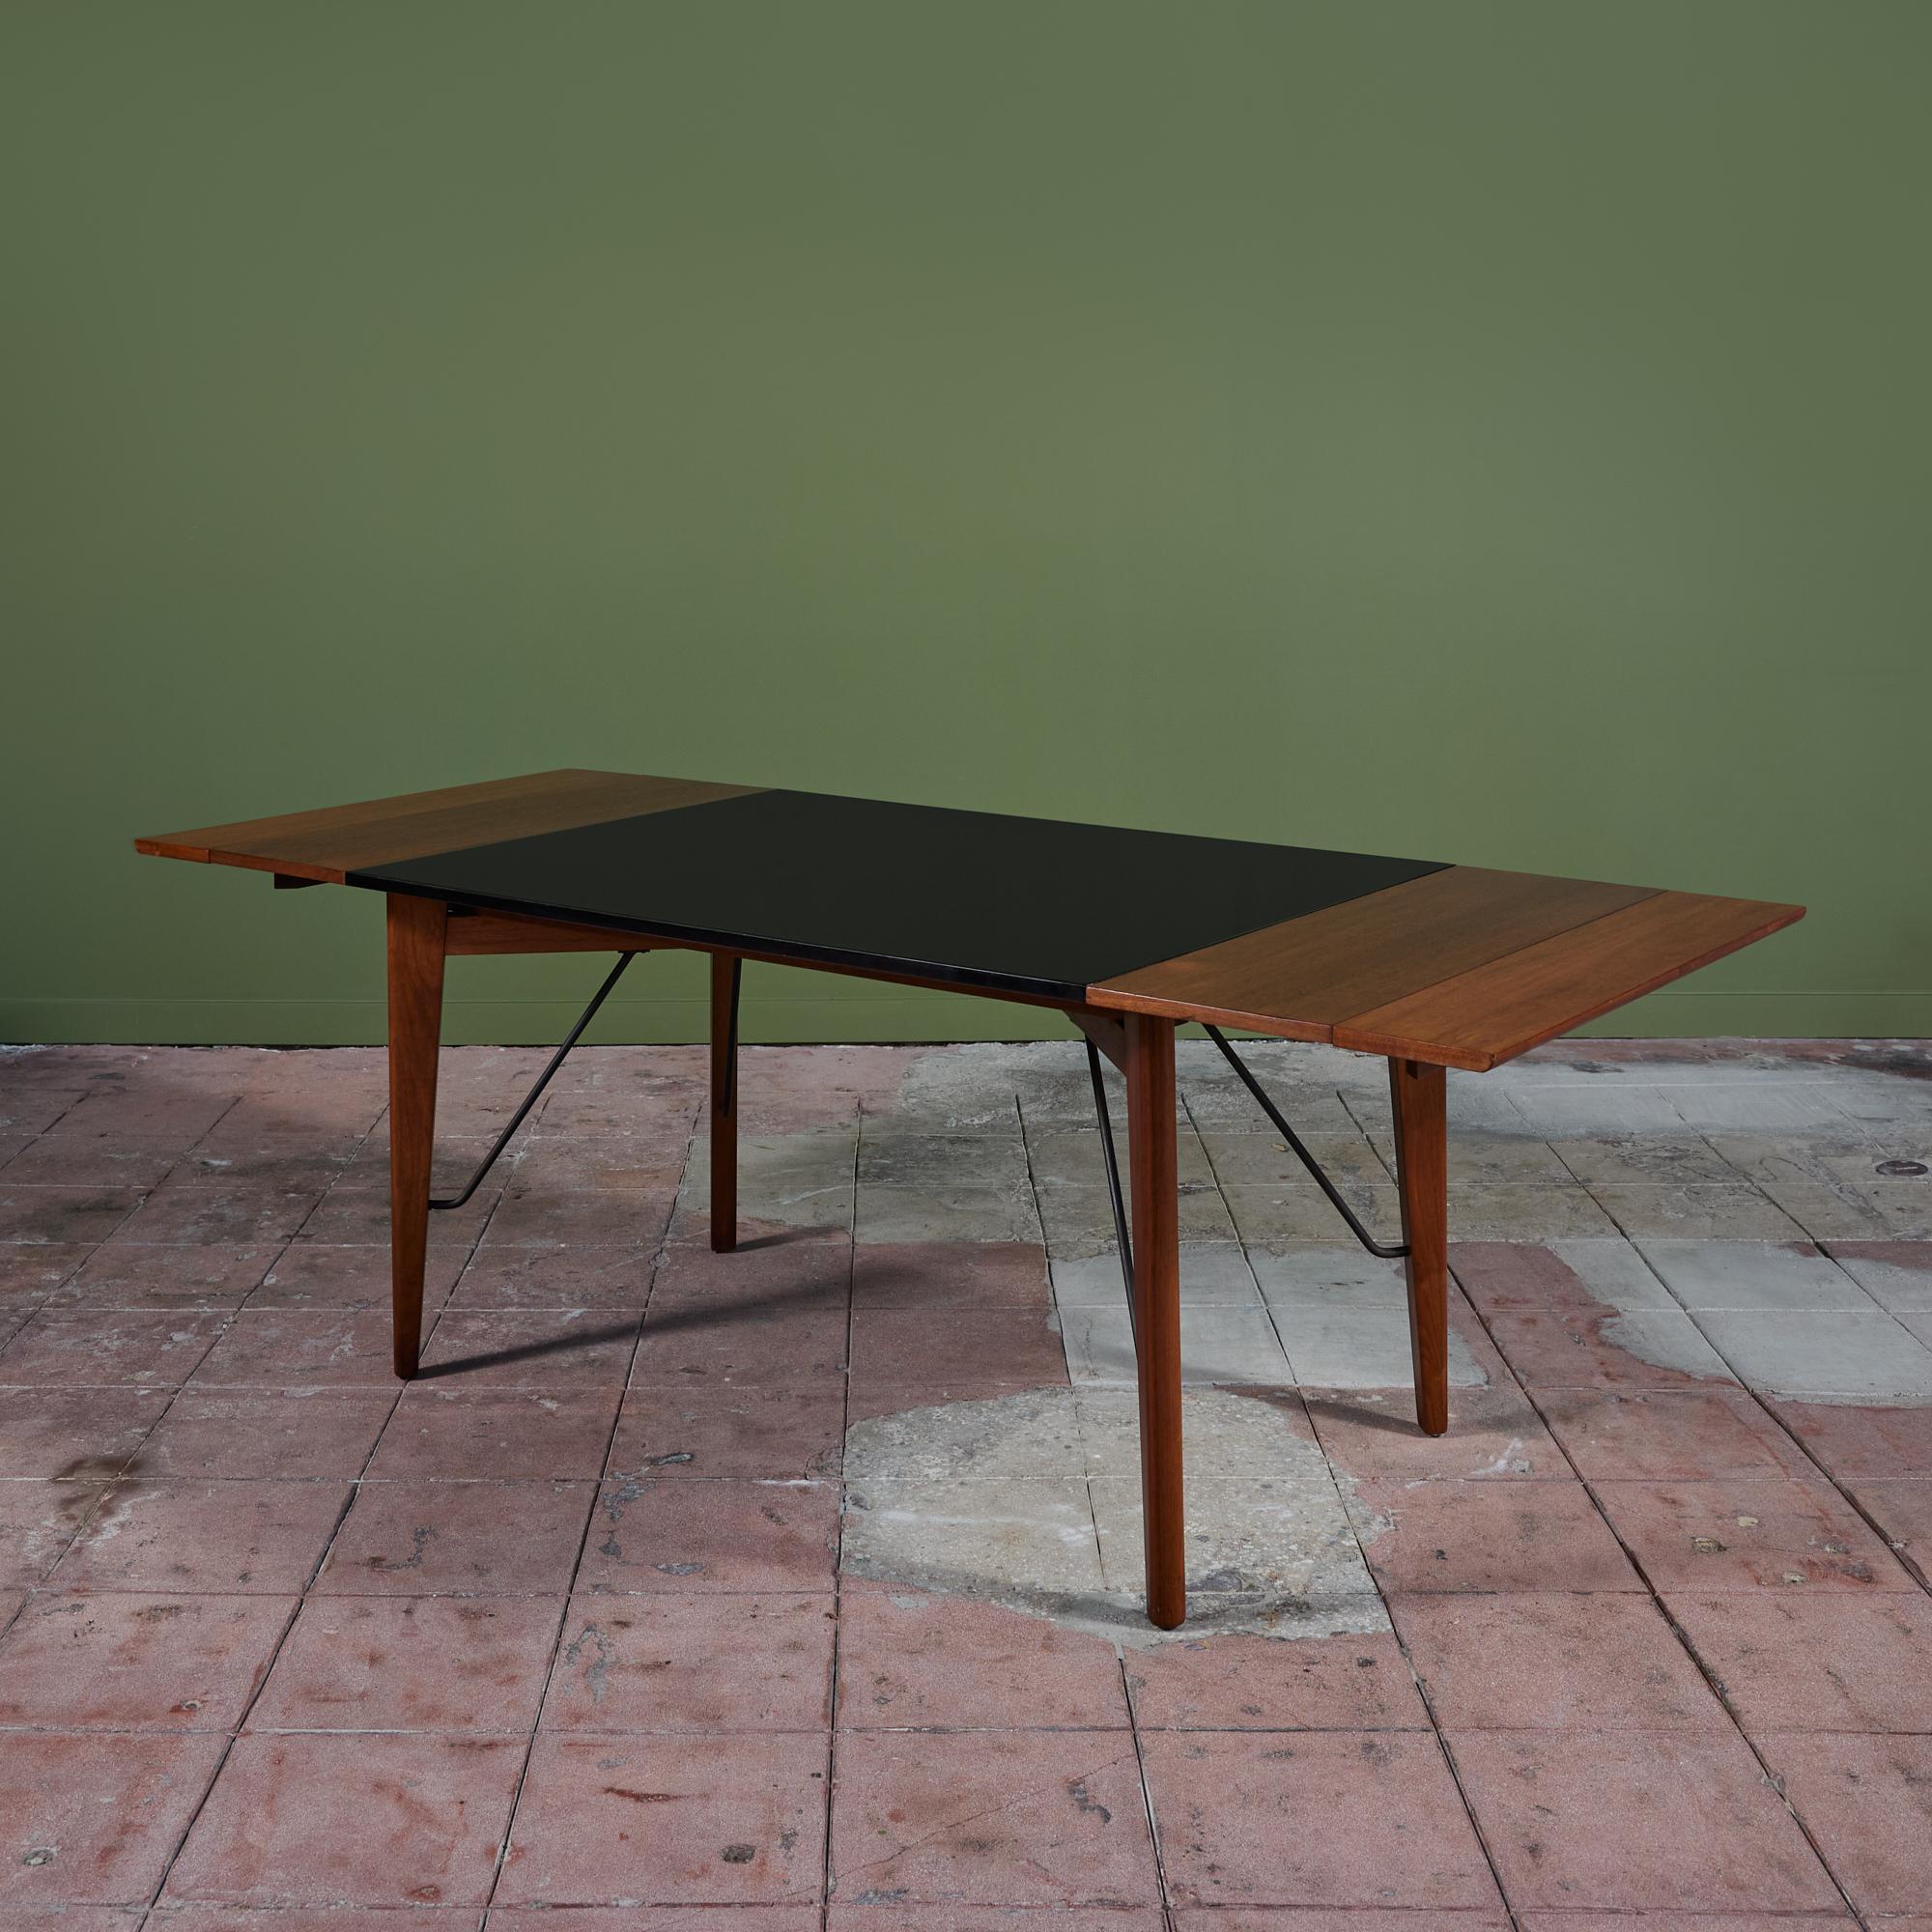 Rectangular dining table by Greta M. Grossman for Glenn of California, c. 1950s, USA. The table features a solid walnut wood frame with a black laminate top and iron hardware. The expandable table has two removable leaves, allowing it to expand up